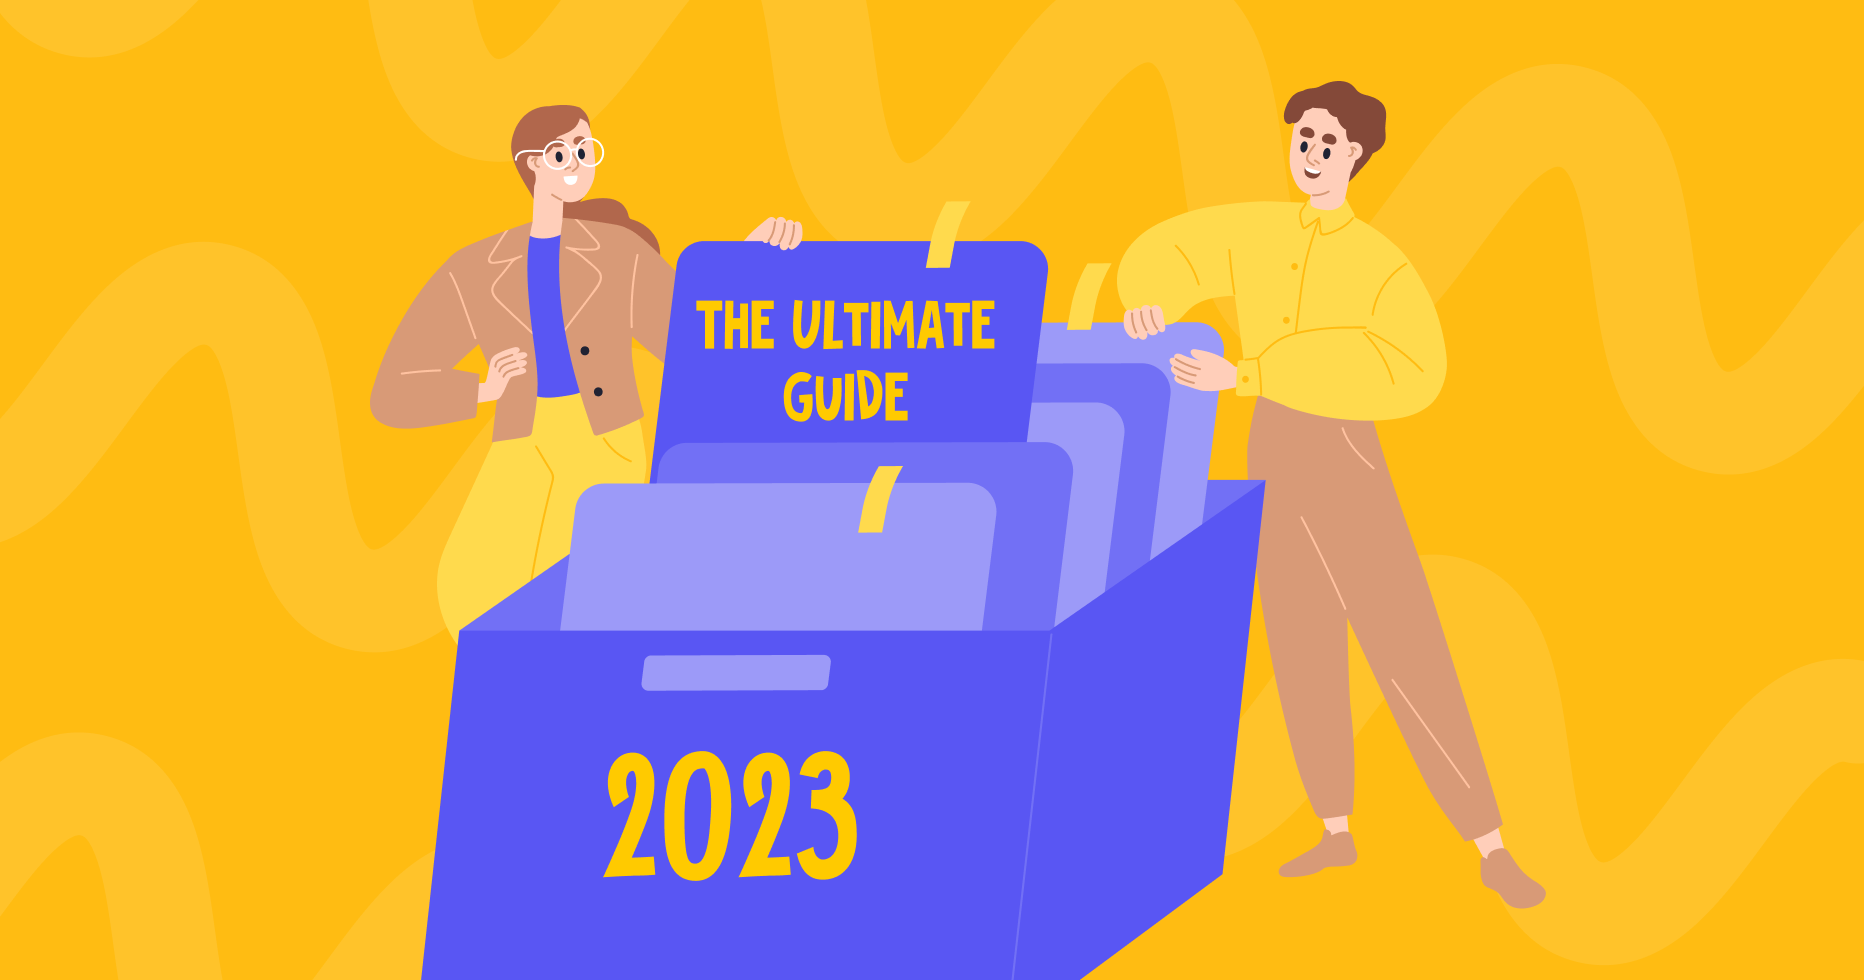 ClickBank Review: 10-year Affiliate Expert Opinion (2023)